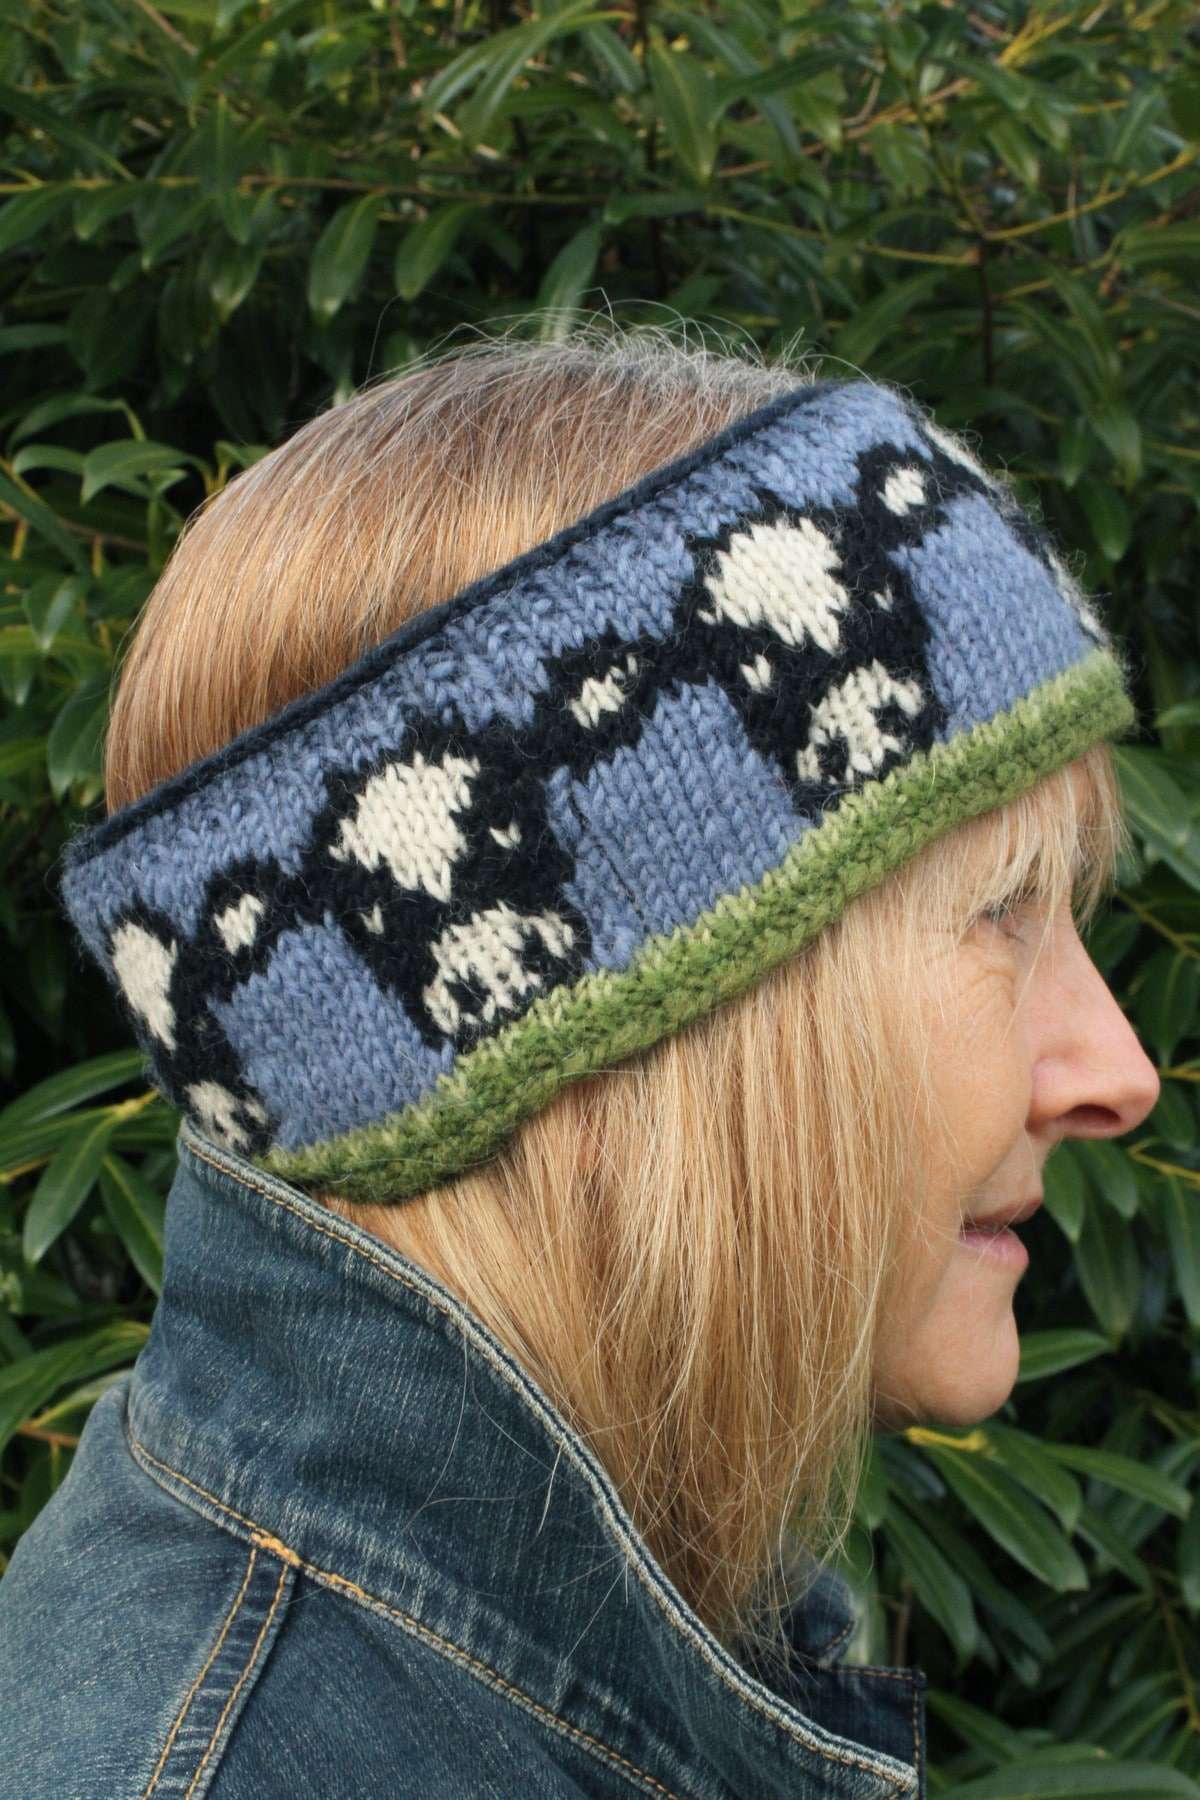 dairycow3 <p style="text-align: center"><strong><span style="font-size: 18pt">Dairy Cow Headband, Hand Knitted</span></strong></p> <p style="text-align: center"><span id="span_description"><b><span style="font-size: large">Our farm favourite Dairy Cow will be sure to bring a smile to your face. </span></b></span></p> <p style="text-align: center"><b><span style="font-size: large">Wear this jolly Dairy Cow Headband for warmth and cheer!</span></b></p> <h2 id="Sub_Title" style="text-align: center"><span style="font-size: large">Womens hand knitted wool headband, with animal farm dairy cow pattern.</span></h2> <div style="text-align: center"> <ul> <li><span style="font-size: x-large">100% Wool</span></li> <li><span style="font-size: x-large">Fleece lined around the forehead for comfort</span></li> <li><span style="font-size: x-large">Hand knitted</span></li> <li><span style="font-size: x-large">Fair Trade and Handmade in Nepal</span></li> </ul> </div> <p style="text-align: center"><b>Colours and patterns may vary slightly due to the handmade nature of this product. </b></p> <div class="row"> <div id="item_price" class="col-sm-12"> <p style="text-align: center"><b>No two items are exactly the same!</b></p> <p style="text-align: center"><b>Handwarmers and Bobble Hat available in this pattern.</b></p> <p style="text-align: center">All colours are represented as closely as possible, we cannot guarantee 100% accuracy.</p> <h1 style="text-align: center"><strong>FREE P&P</strong></h1> </div> </div>